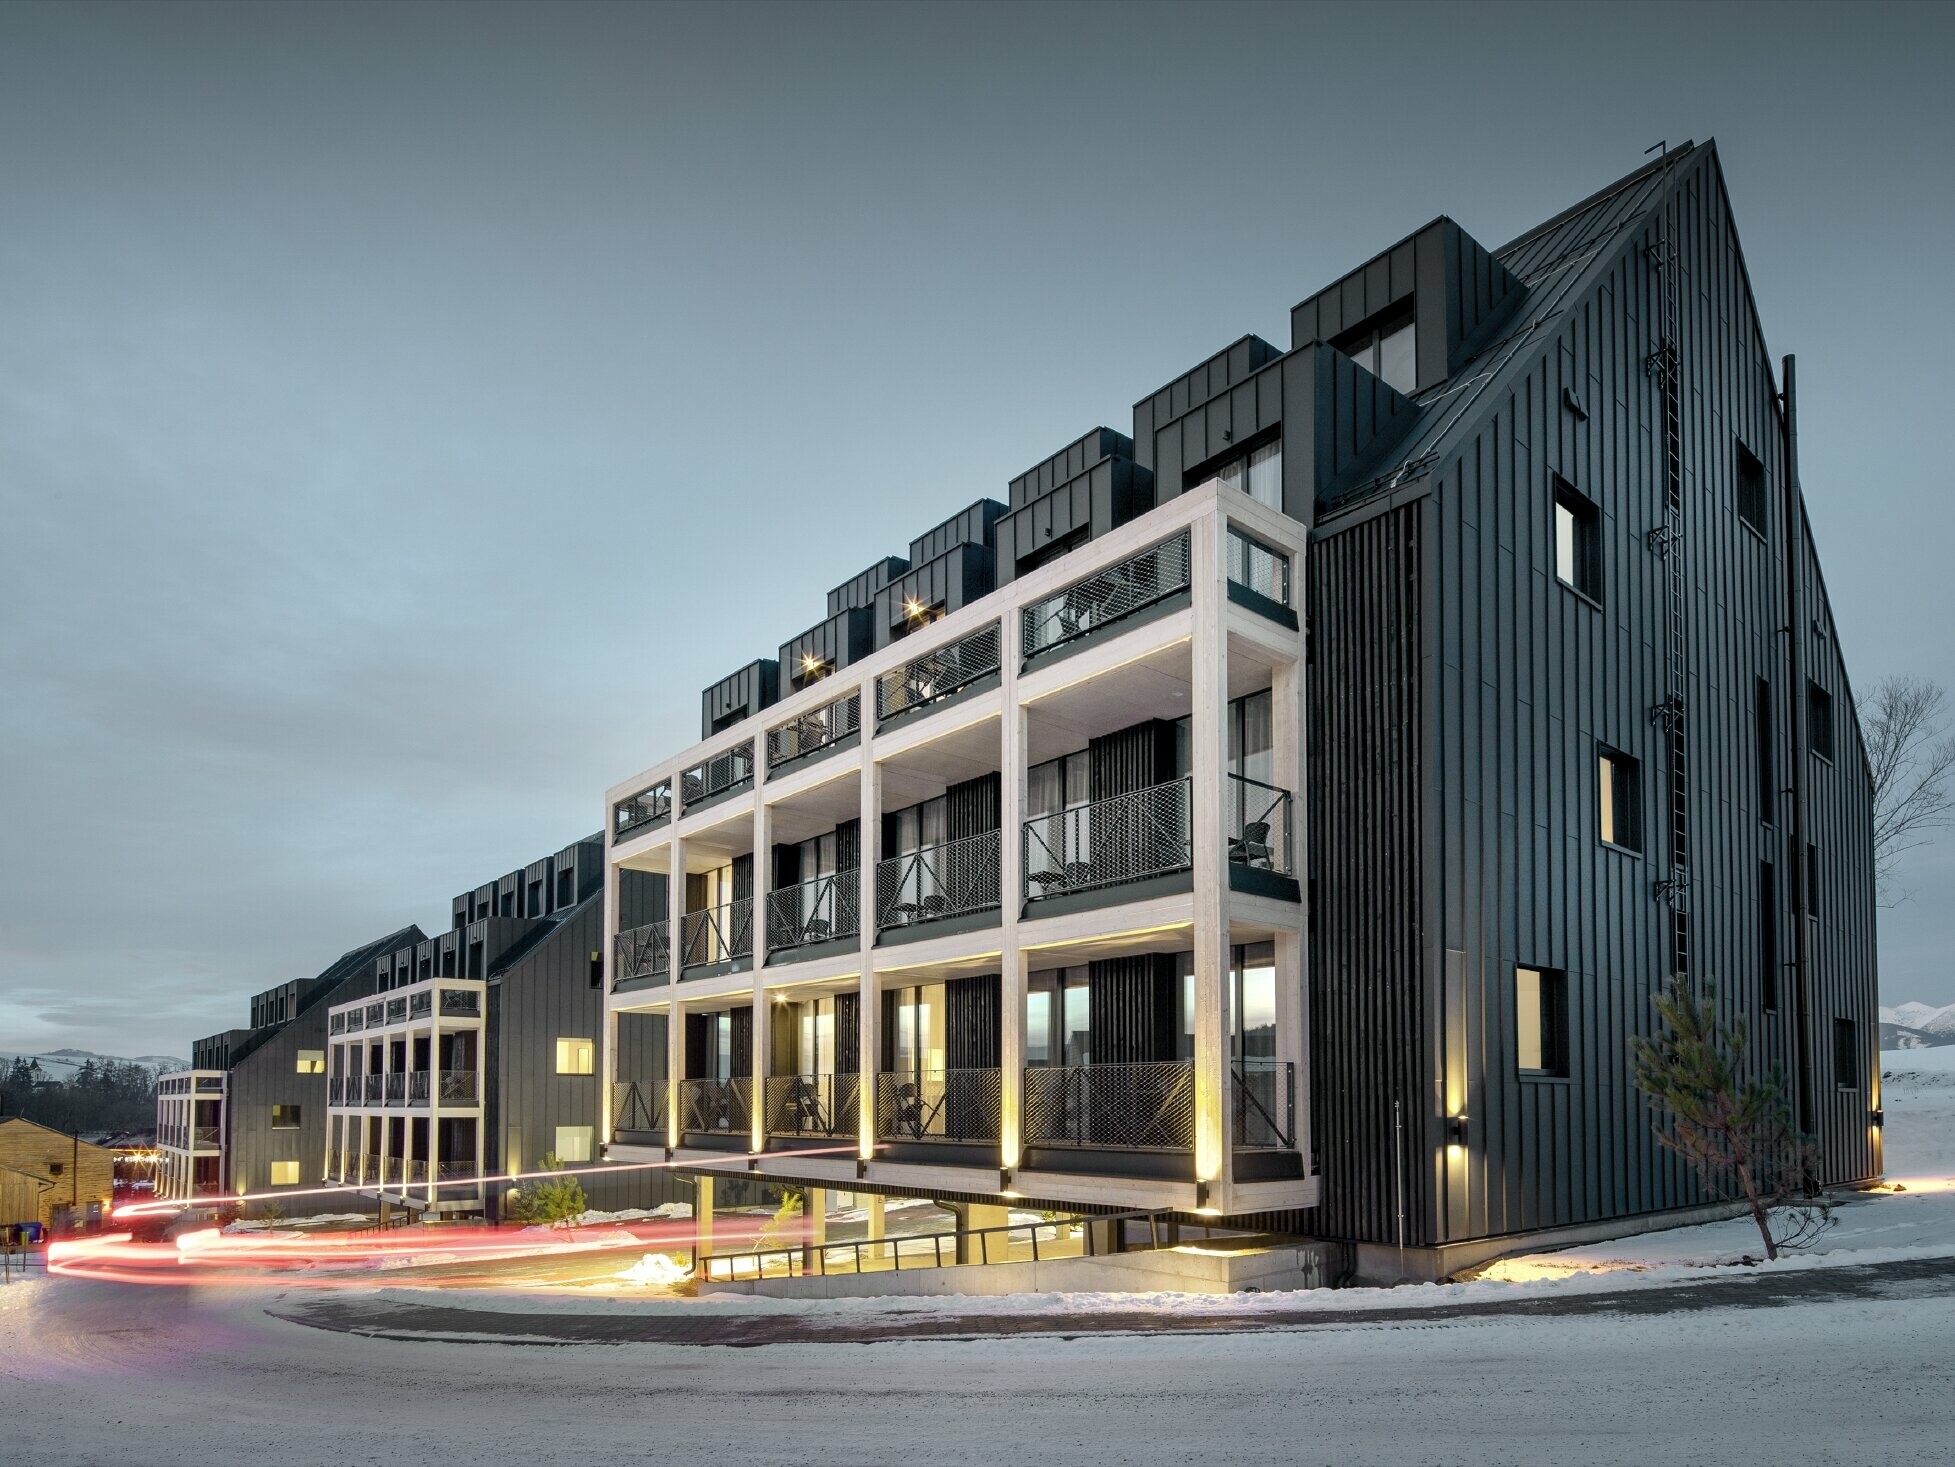 Ski resort in Slovakia with balconies and dormers, the façade is clad with PREFALZ in anthracite, just like the gable roof, snow-covered surroundings